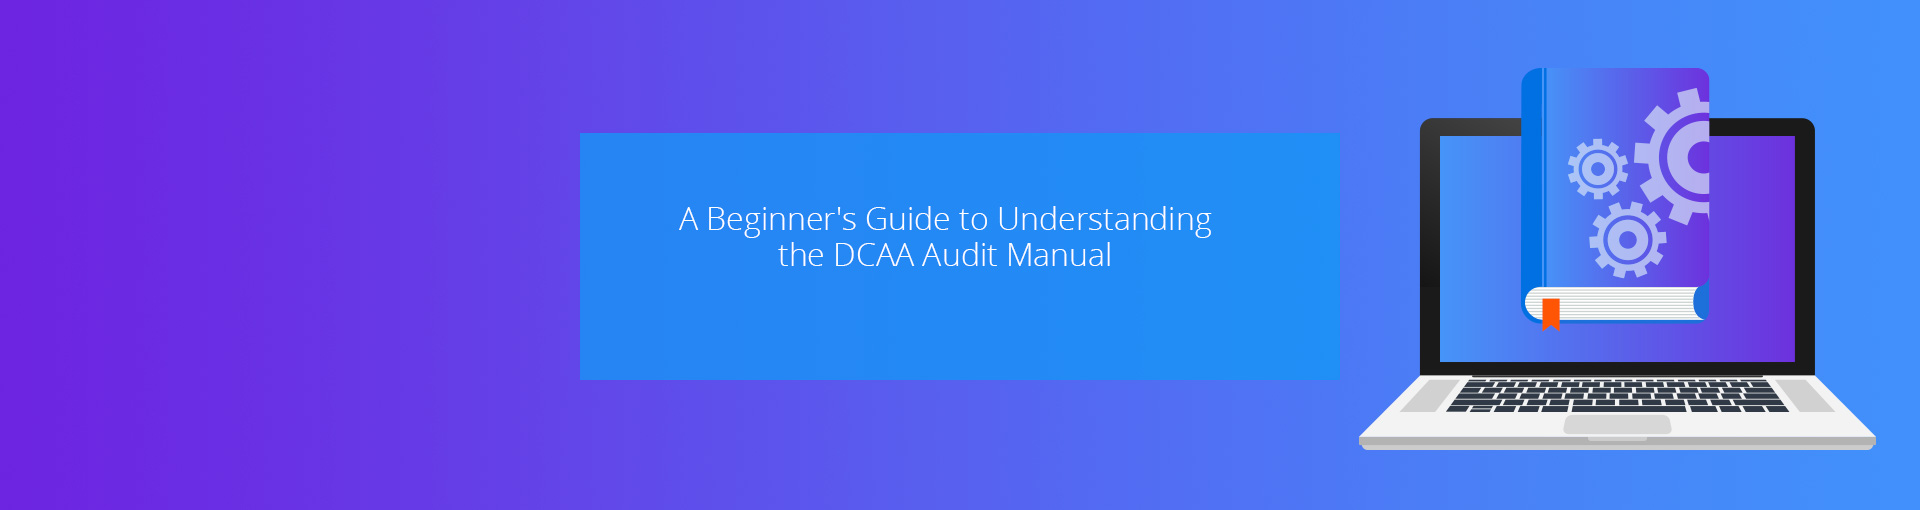 A Beginner's Guide to Understanding the DCAA Audit Manual